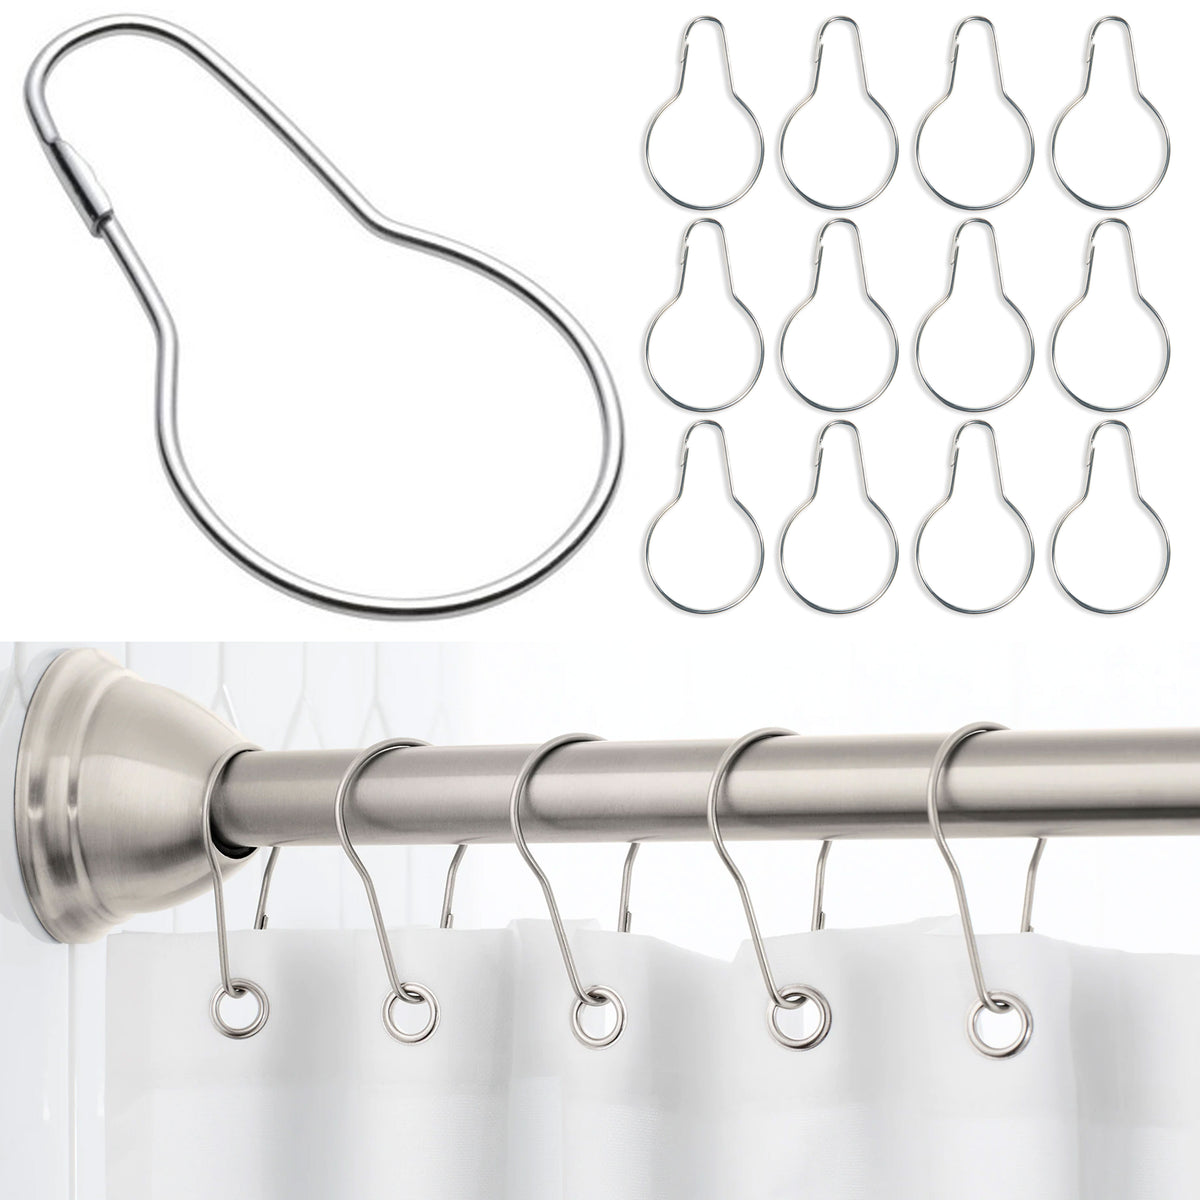 12 PC Silver Glide Metal Curtain Rods Rings Shower Hooks Bathroom Shades Drapes